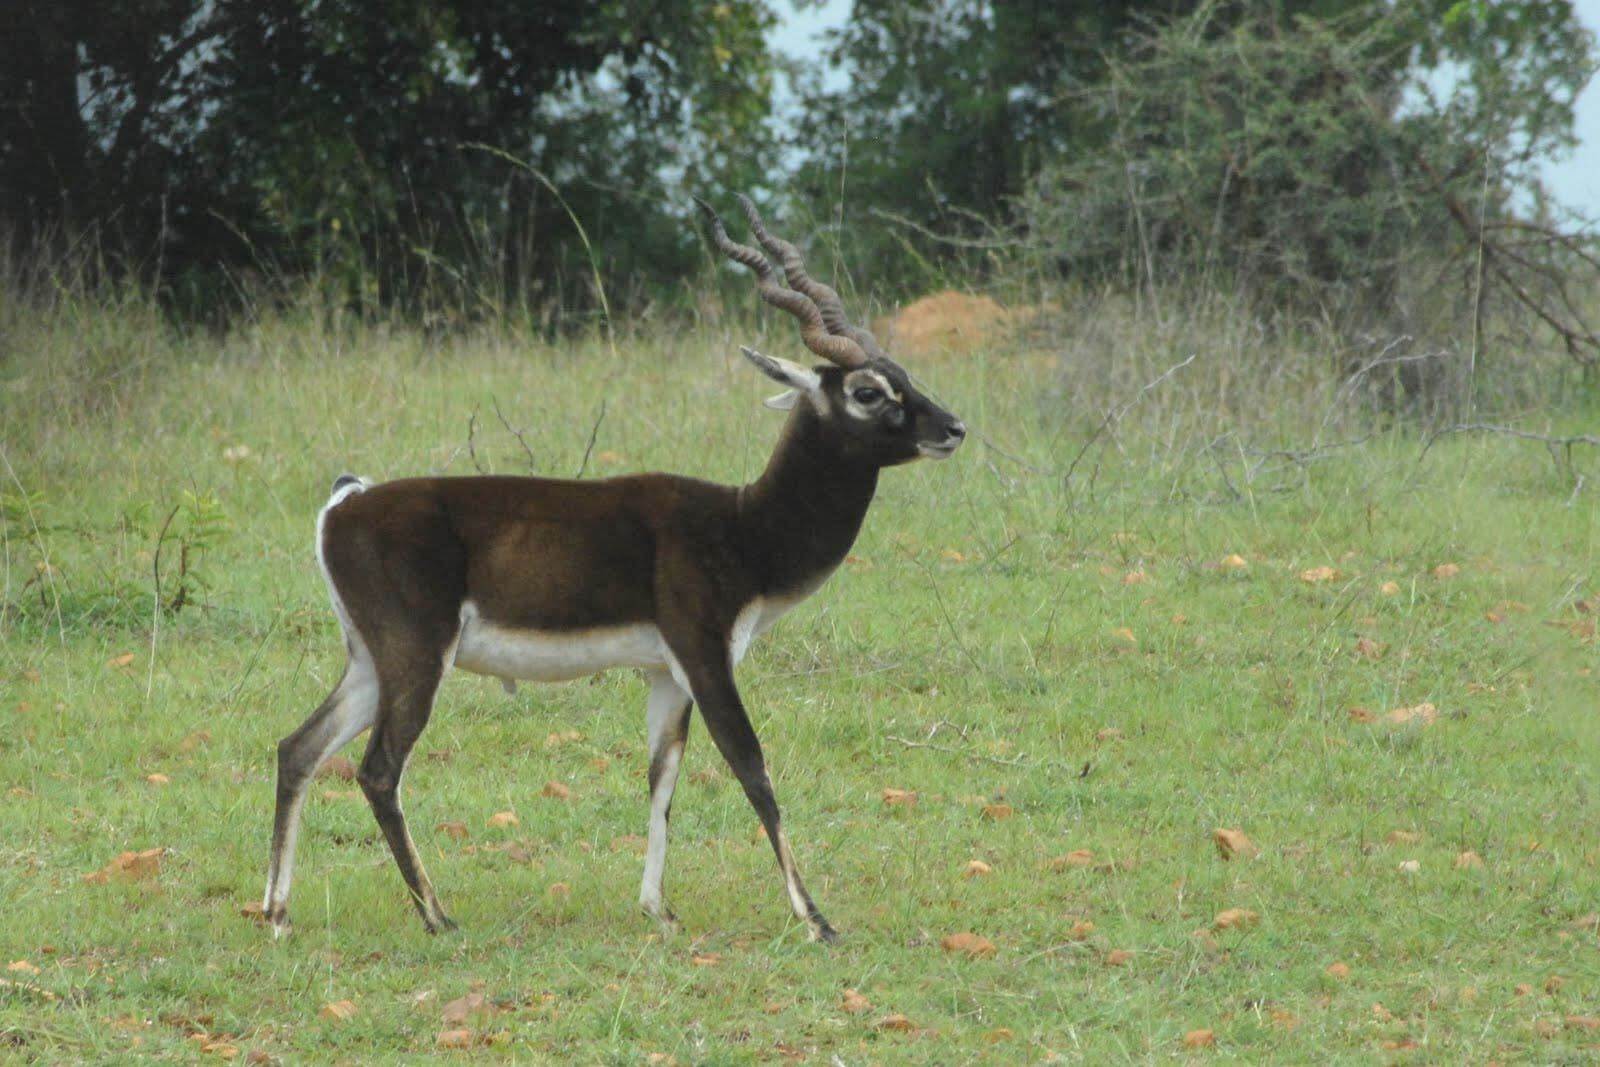 Ranebennur BlackBuck Wildlife Sanctuary [The WildTrails of India app is the best way to get all the details about Indian wildlife sanctuaries (best travel times, animal sightings, safari details, accommodations, activities, prices, etc). Learn more about WildTrails of India here.]